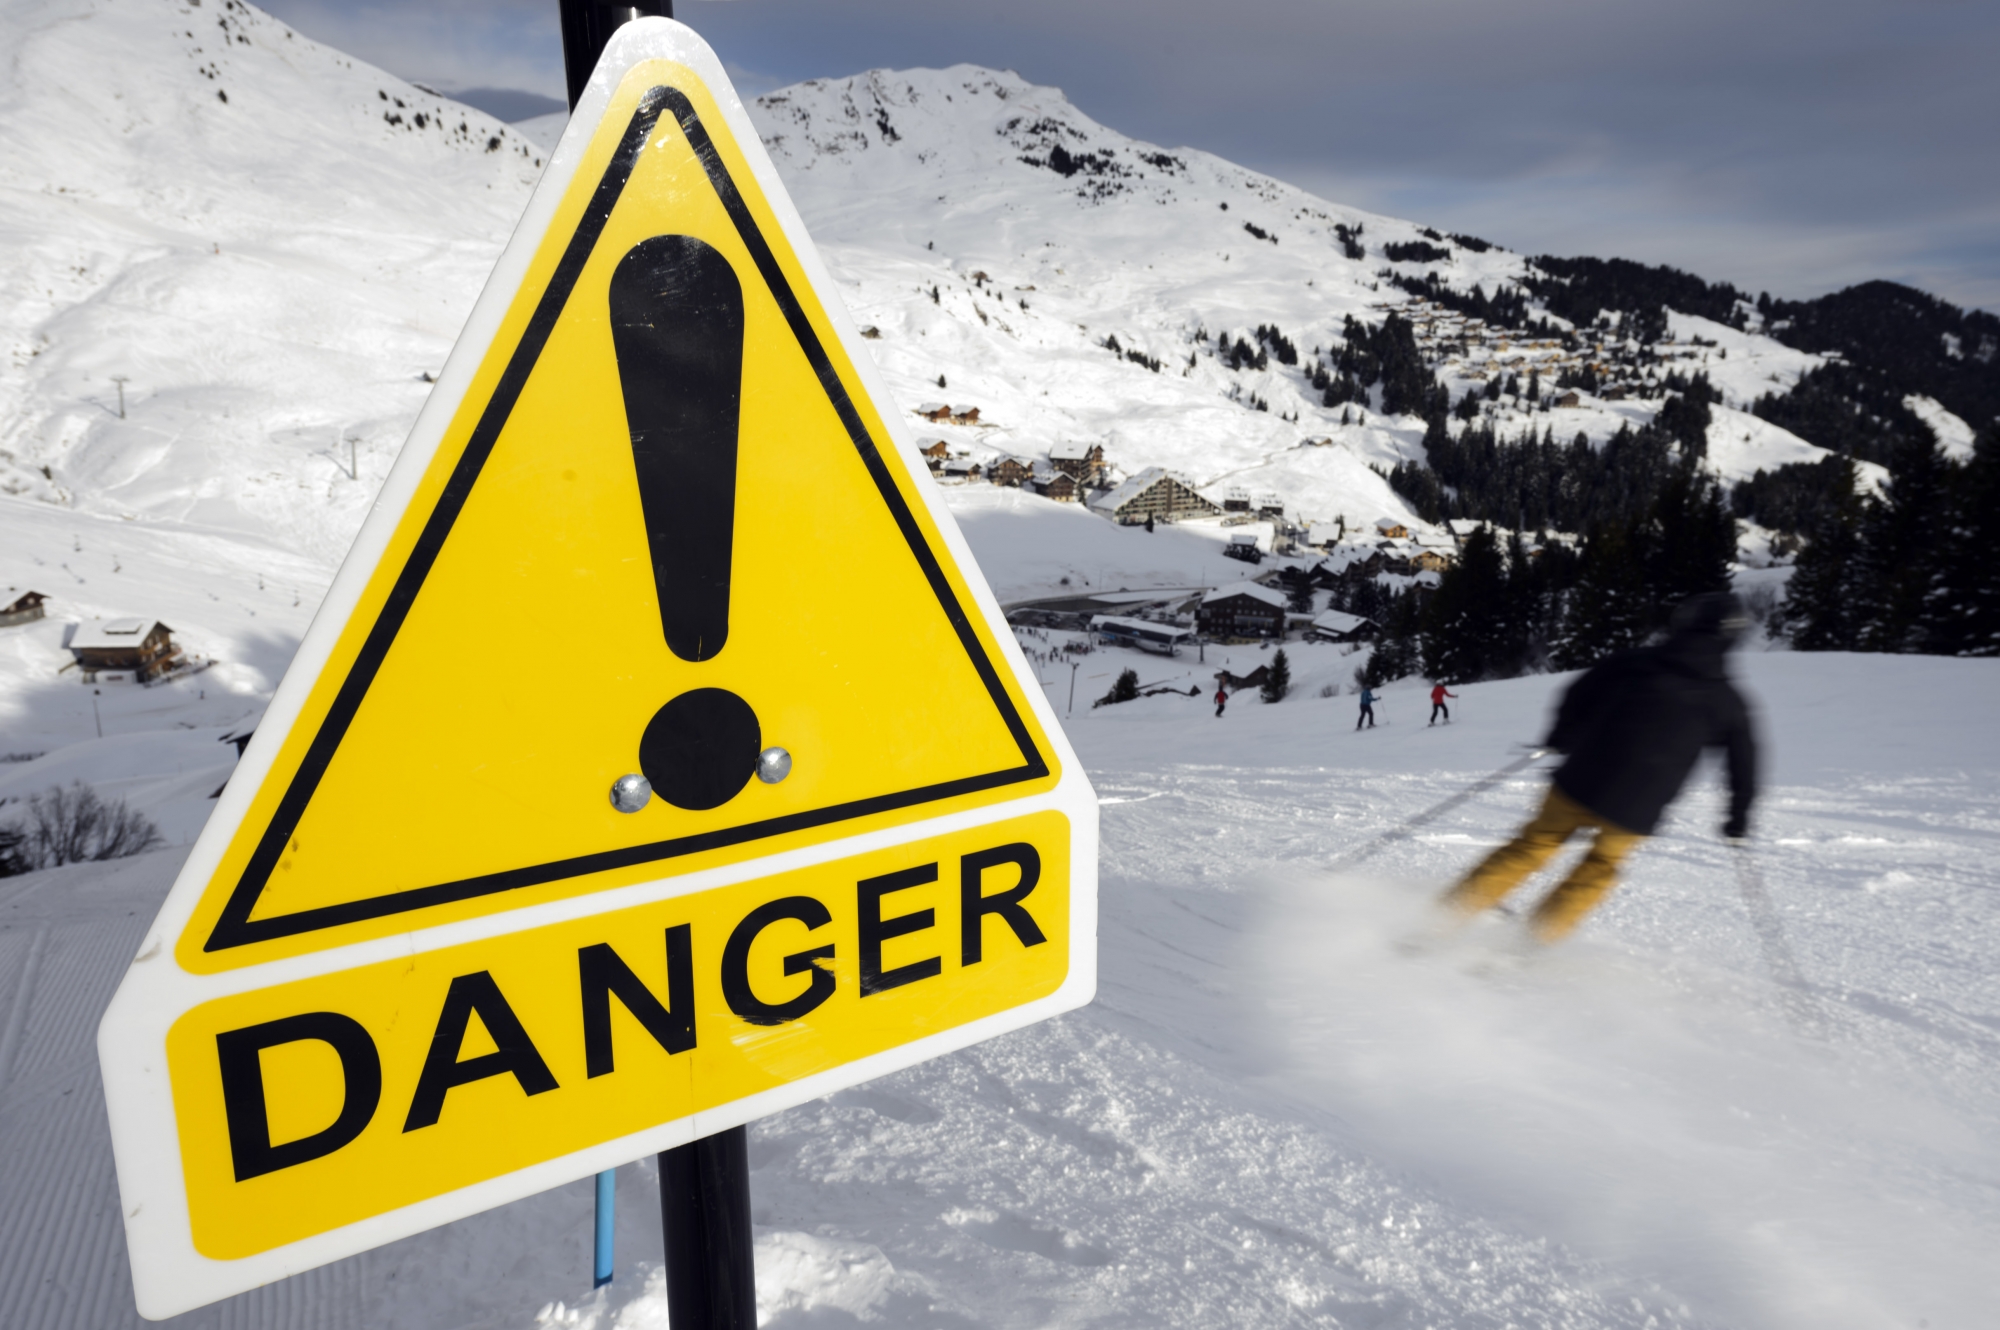 A Skier pass next to a warning sign on the skiing slopes, Saturday, December 28, 2013 at the Portes du Soleil area in the ski resort of Champery - Les Crosets, Switzerland. After the first snowfalls, the ski slopes have opened for the holiday season. (KEYSTONE/Laurent Gillieron)